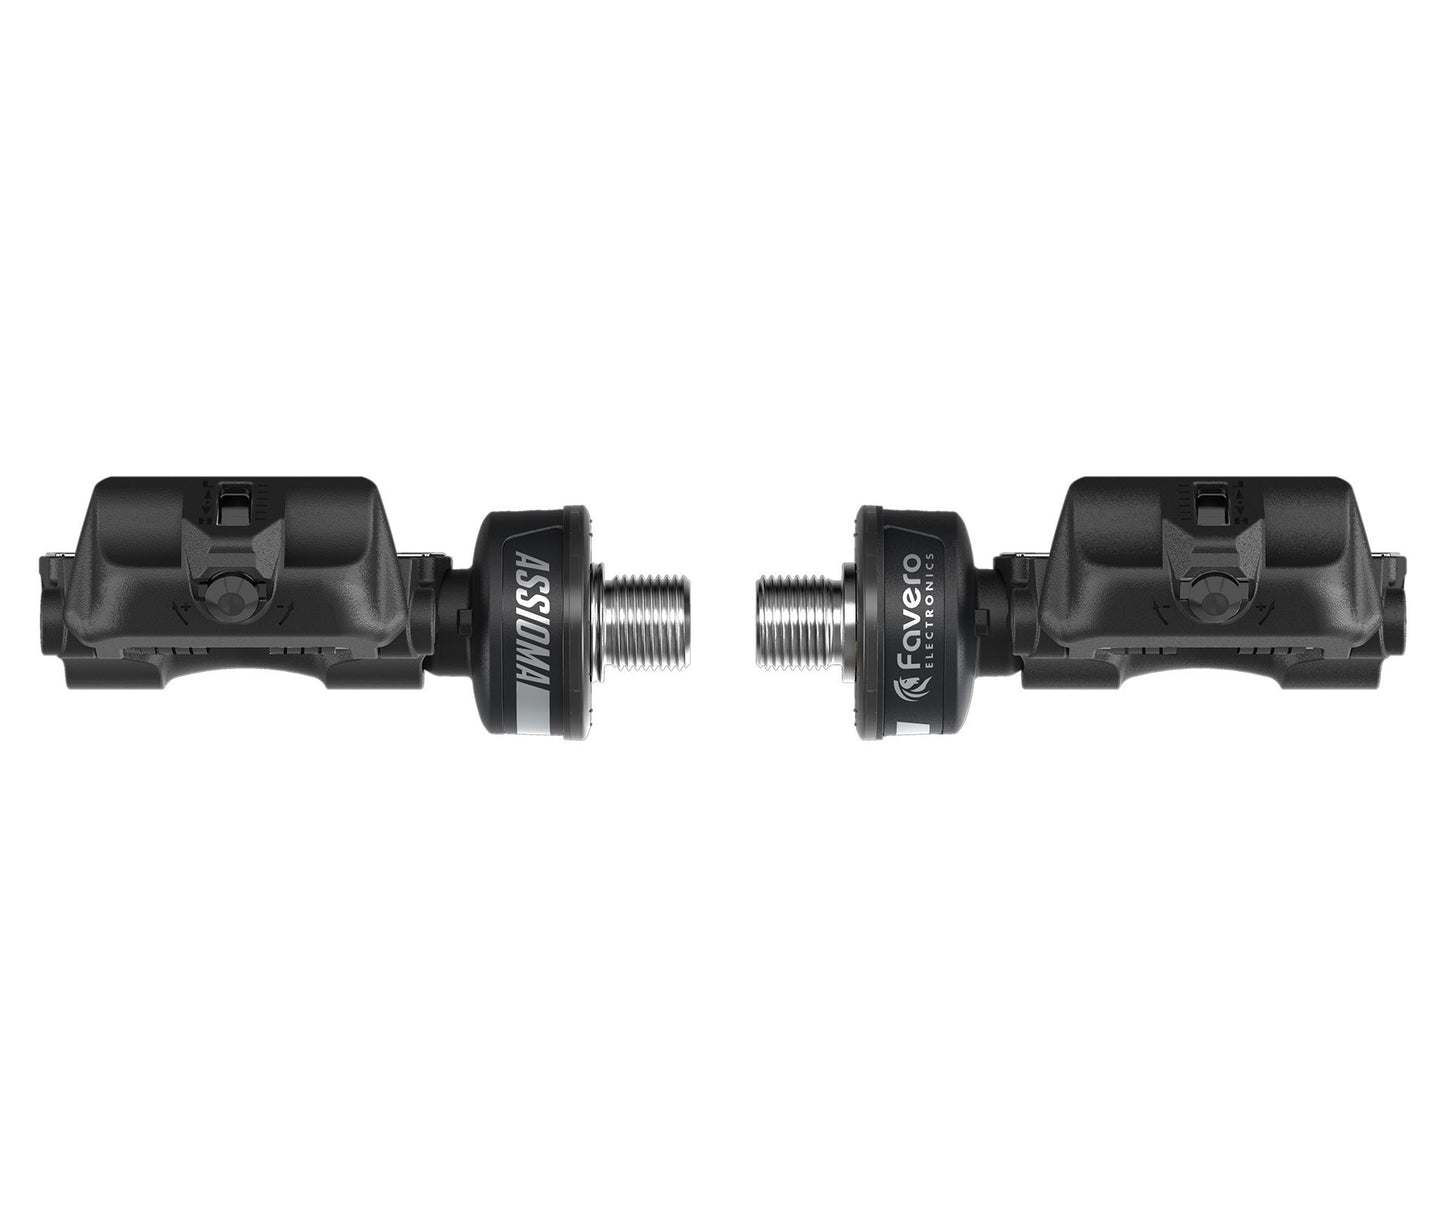 Favero Assioma DUO Dual-Side Pedal-Based Power Meter